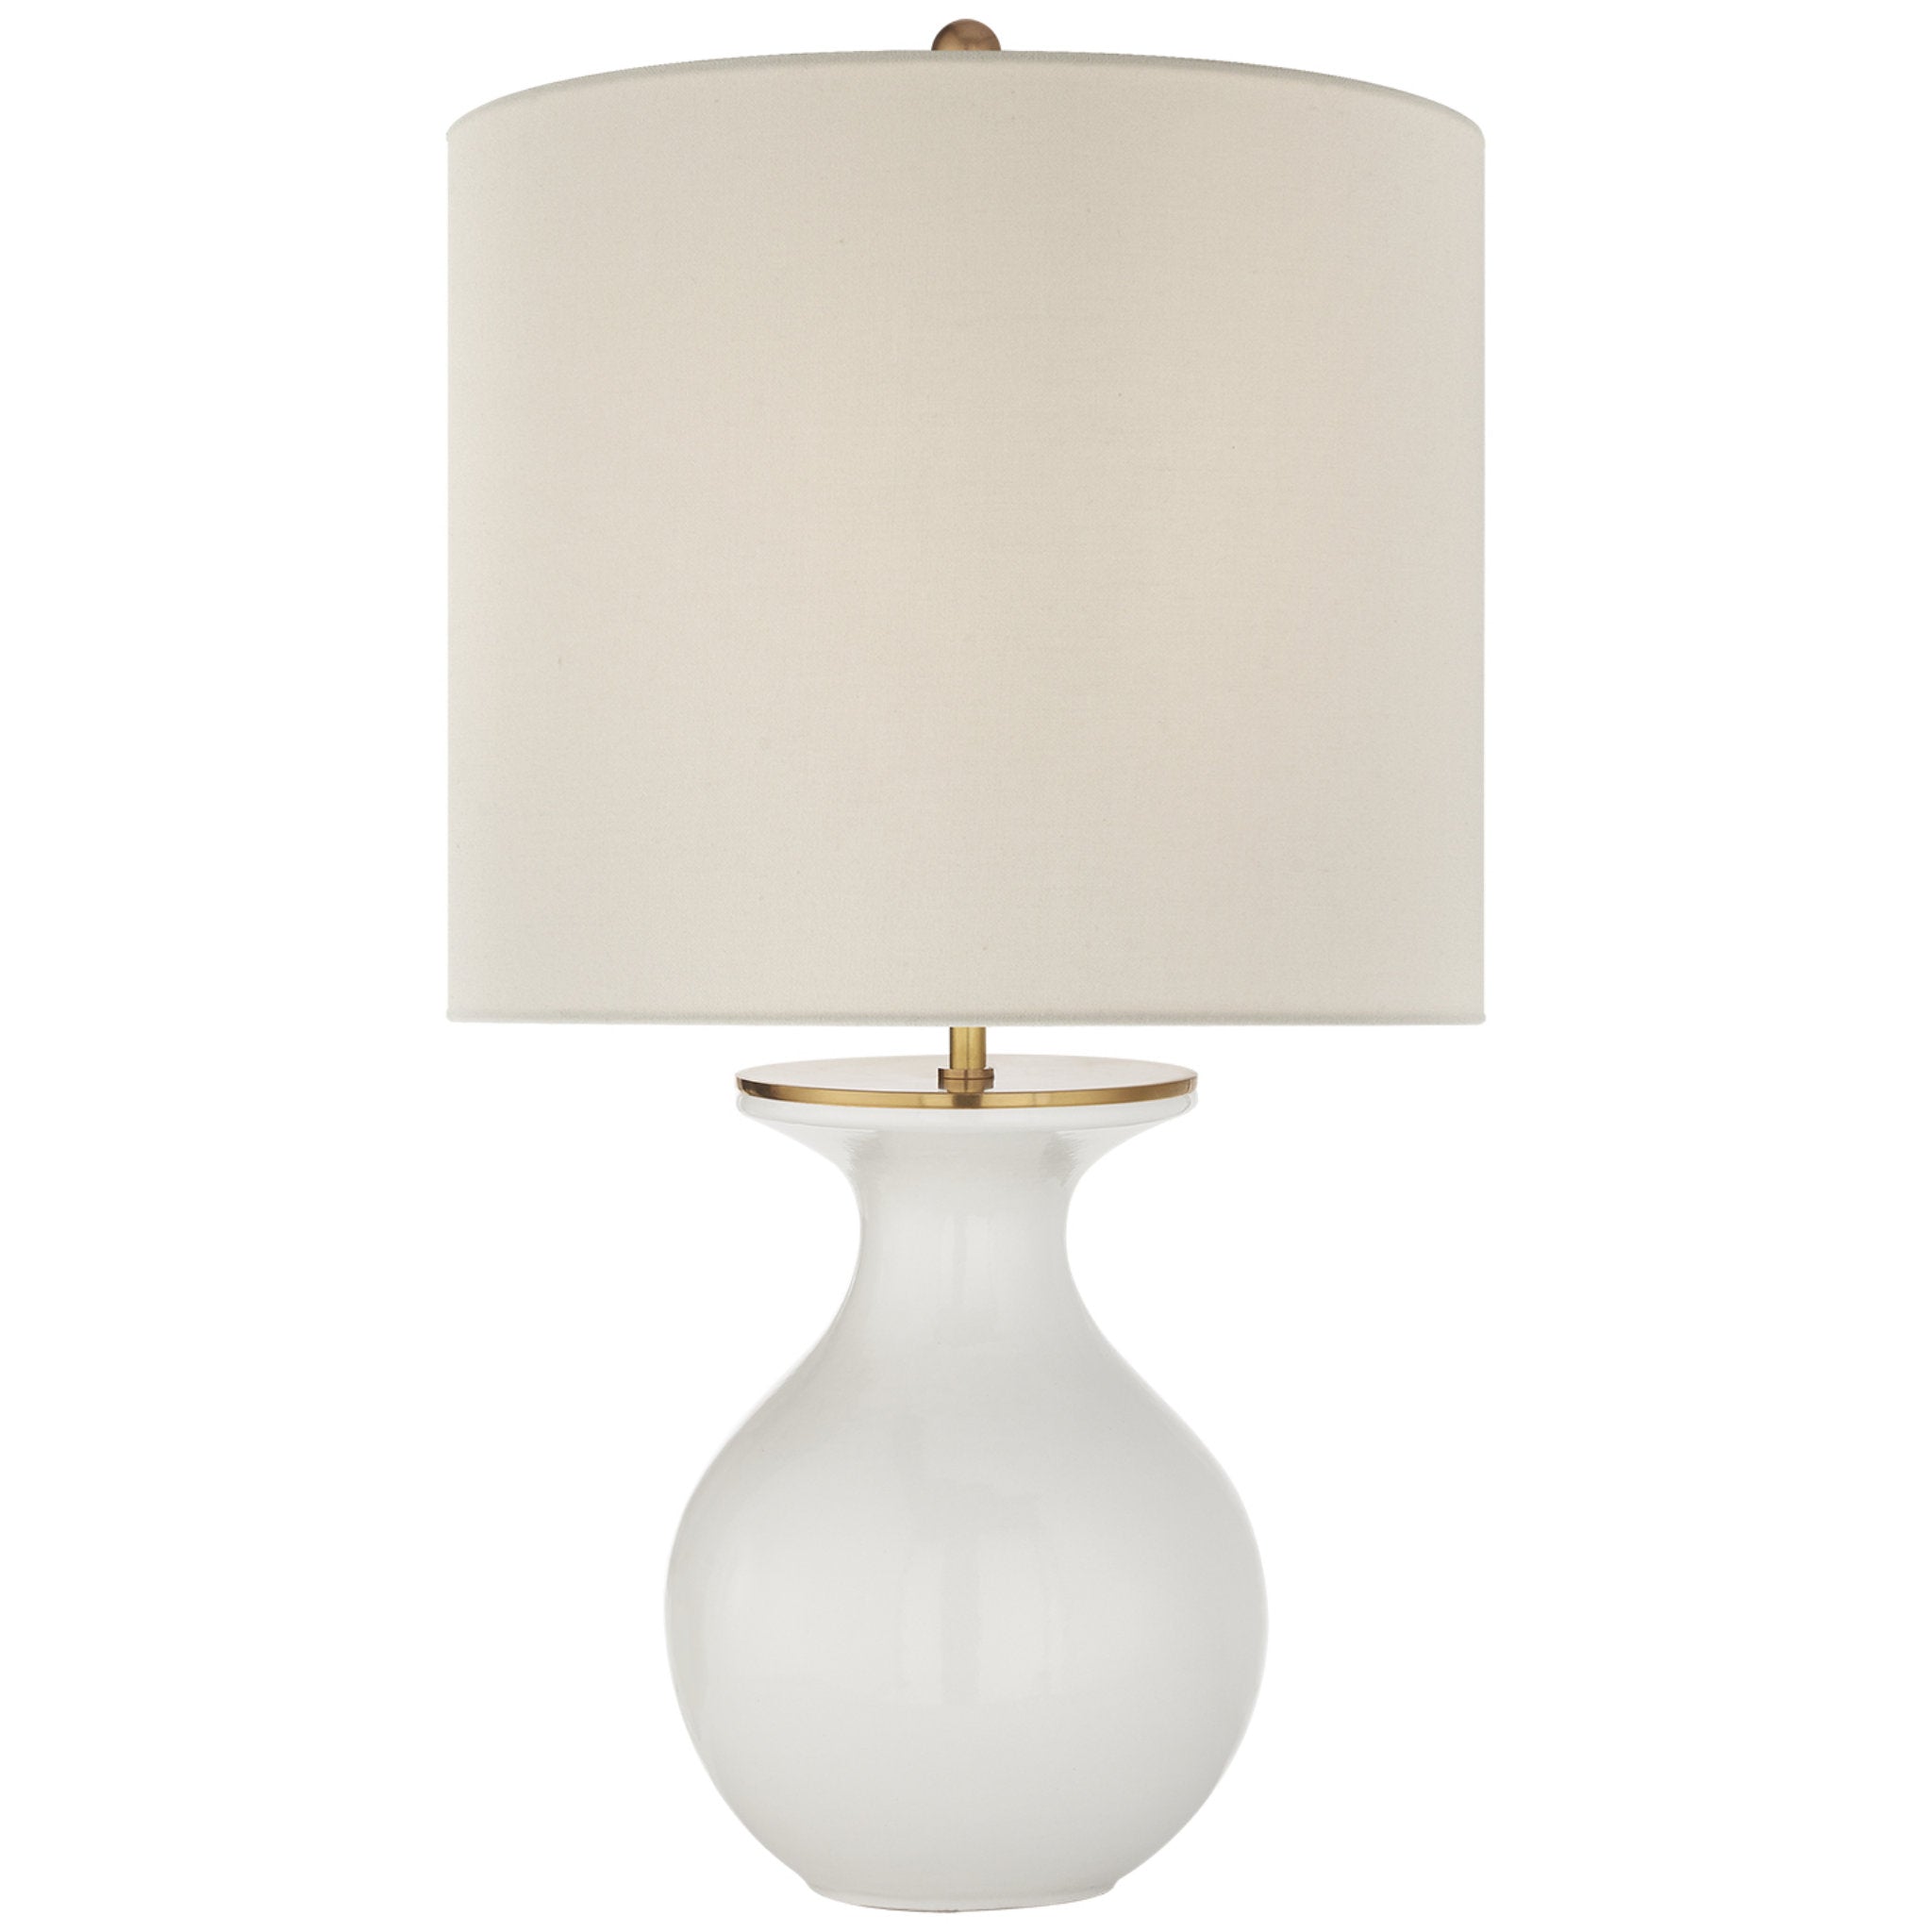 kate spade new york Albie Small Desk Lamp in New White with Cream Linen Shade